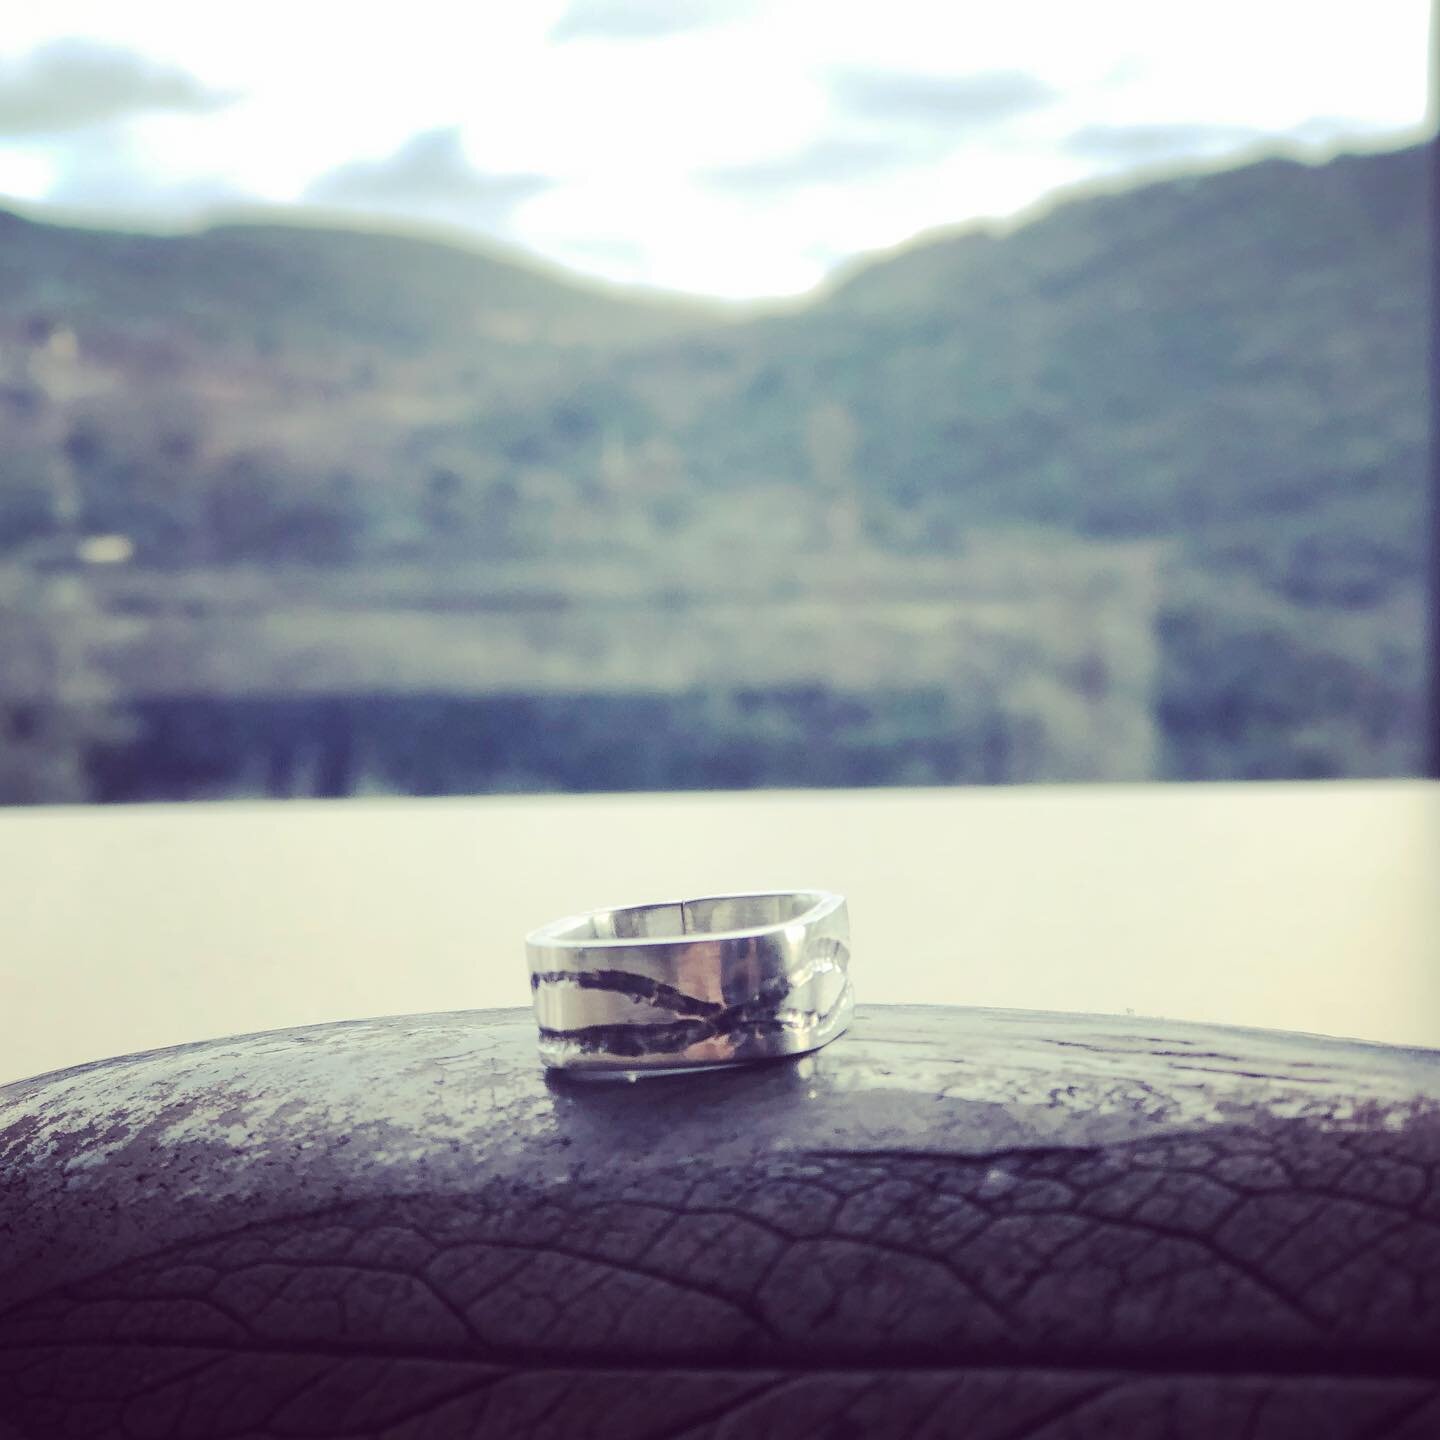 Bit of a dull day so I made a square sterling silver ring to echo the hills from our window.